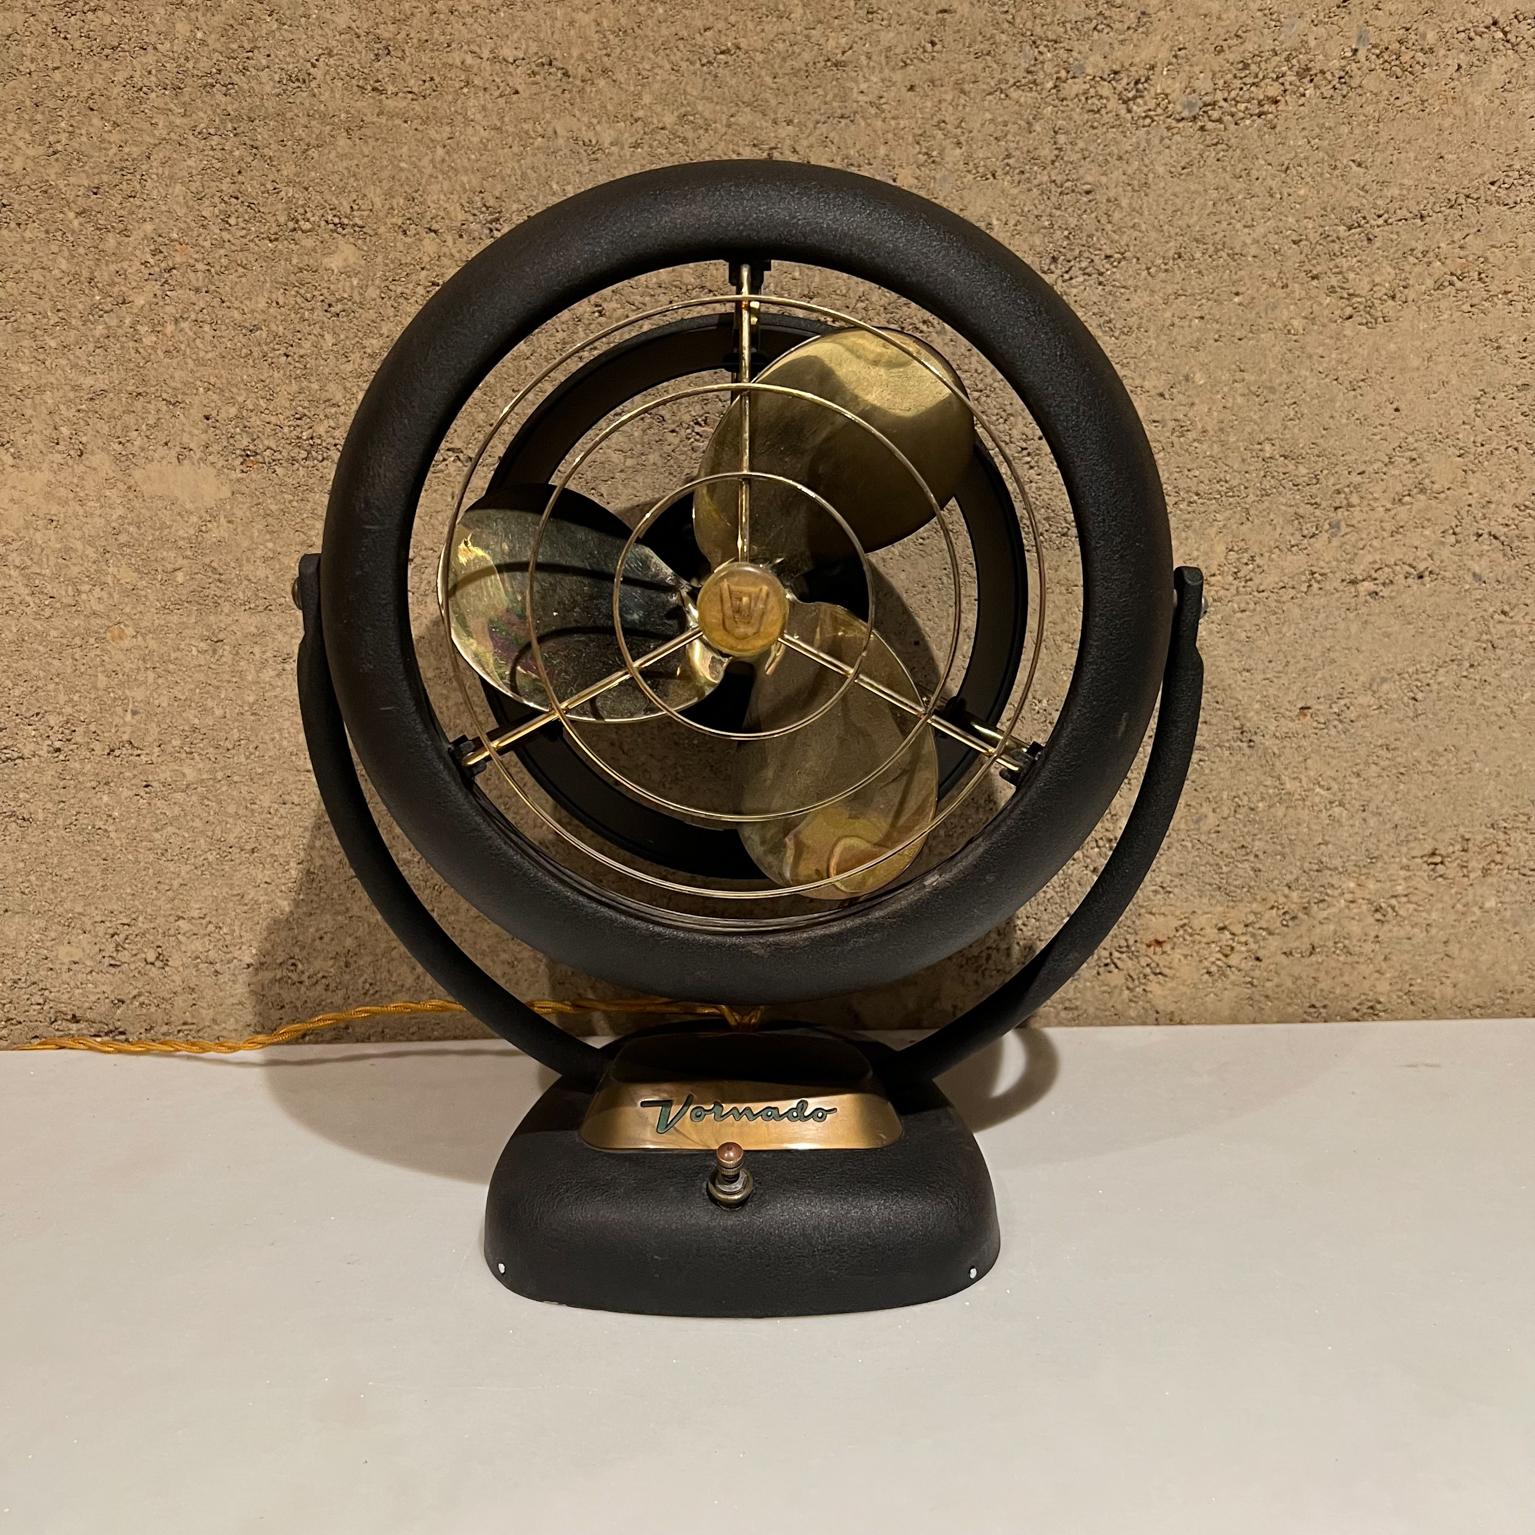 1940s Vornado vintage antique electric fan powerful and silent.
Art Deco era electric table desk top fan with modern industrial design.
Has one speed operation. 
Measures: 16 tall x 16 depth x 24 width
Fully operational. Preowned original